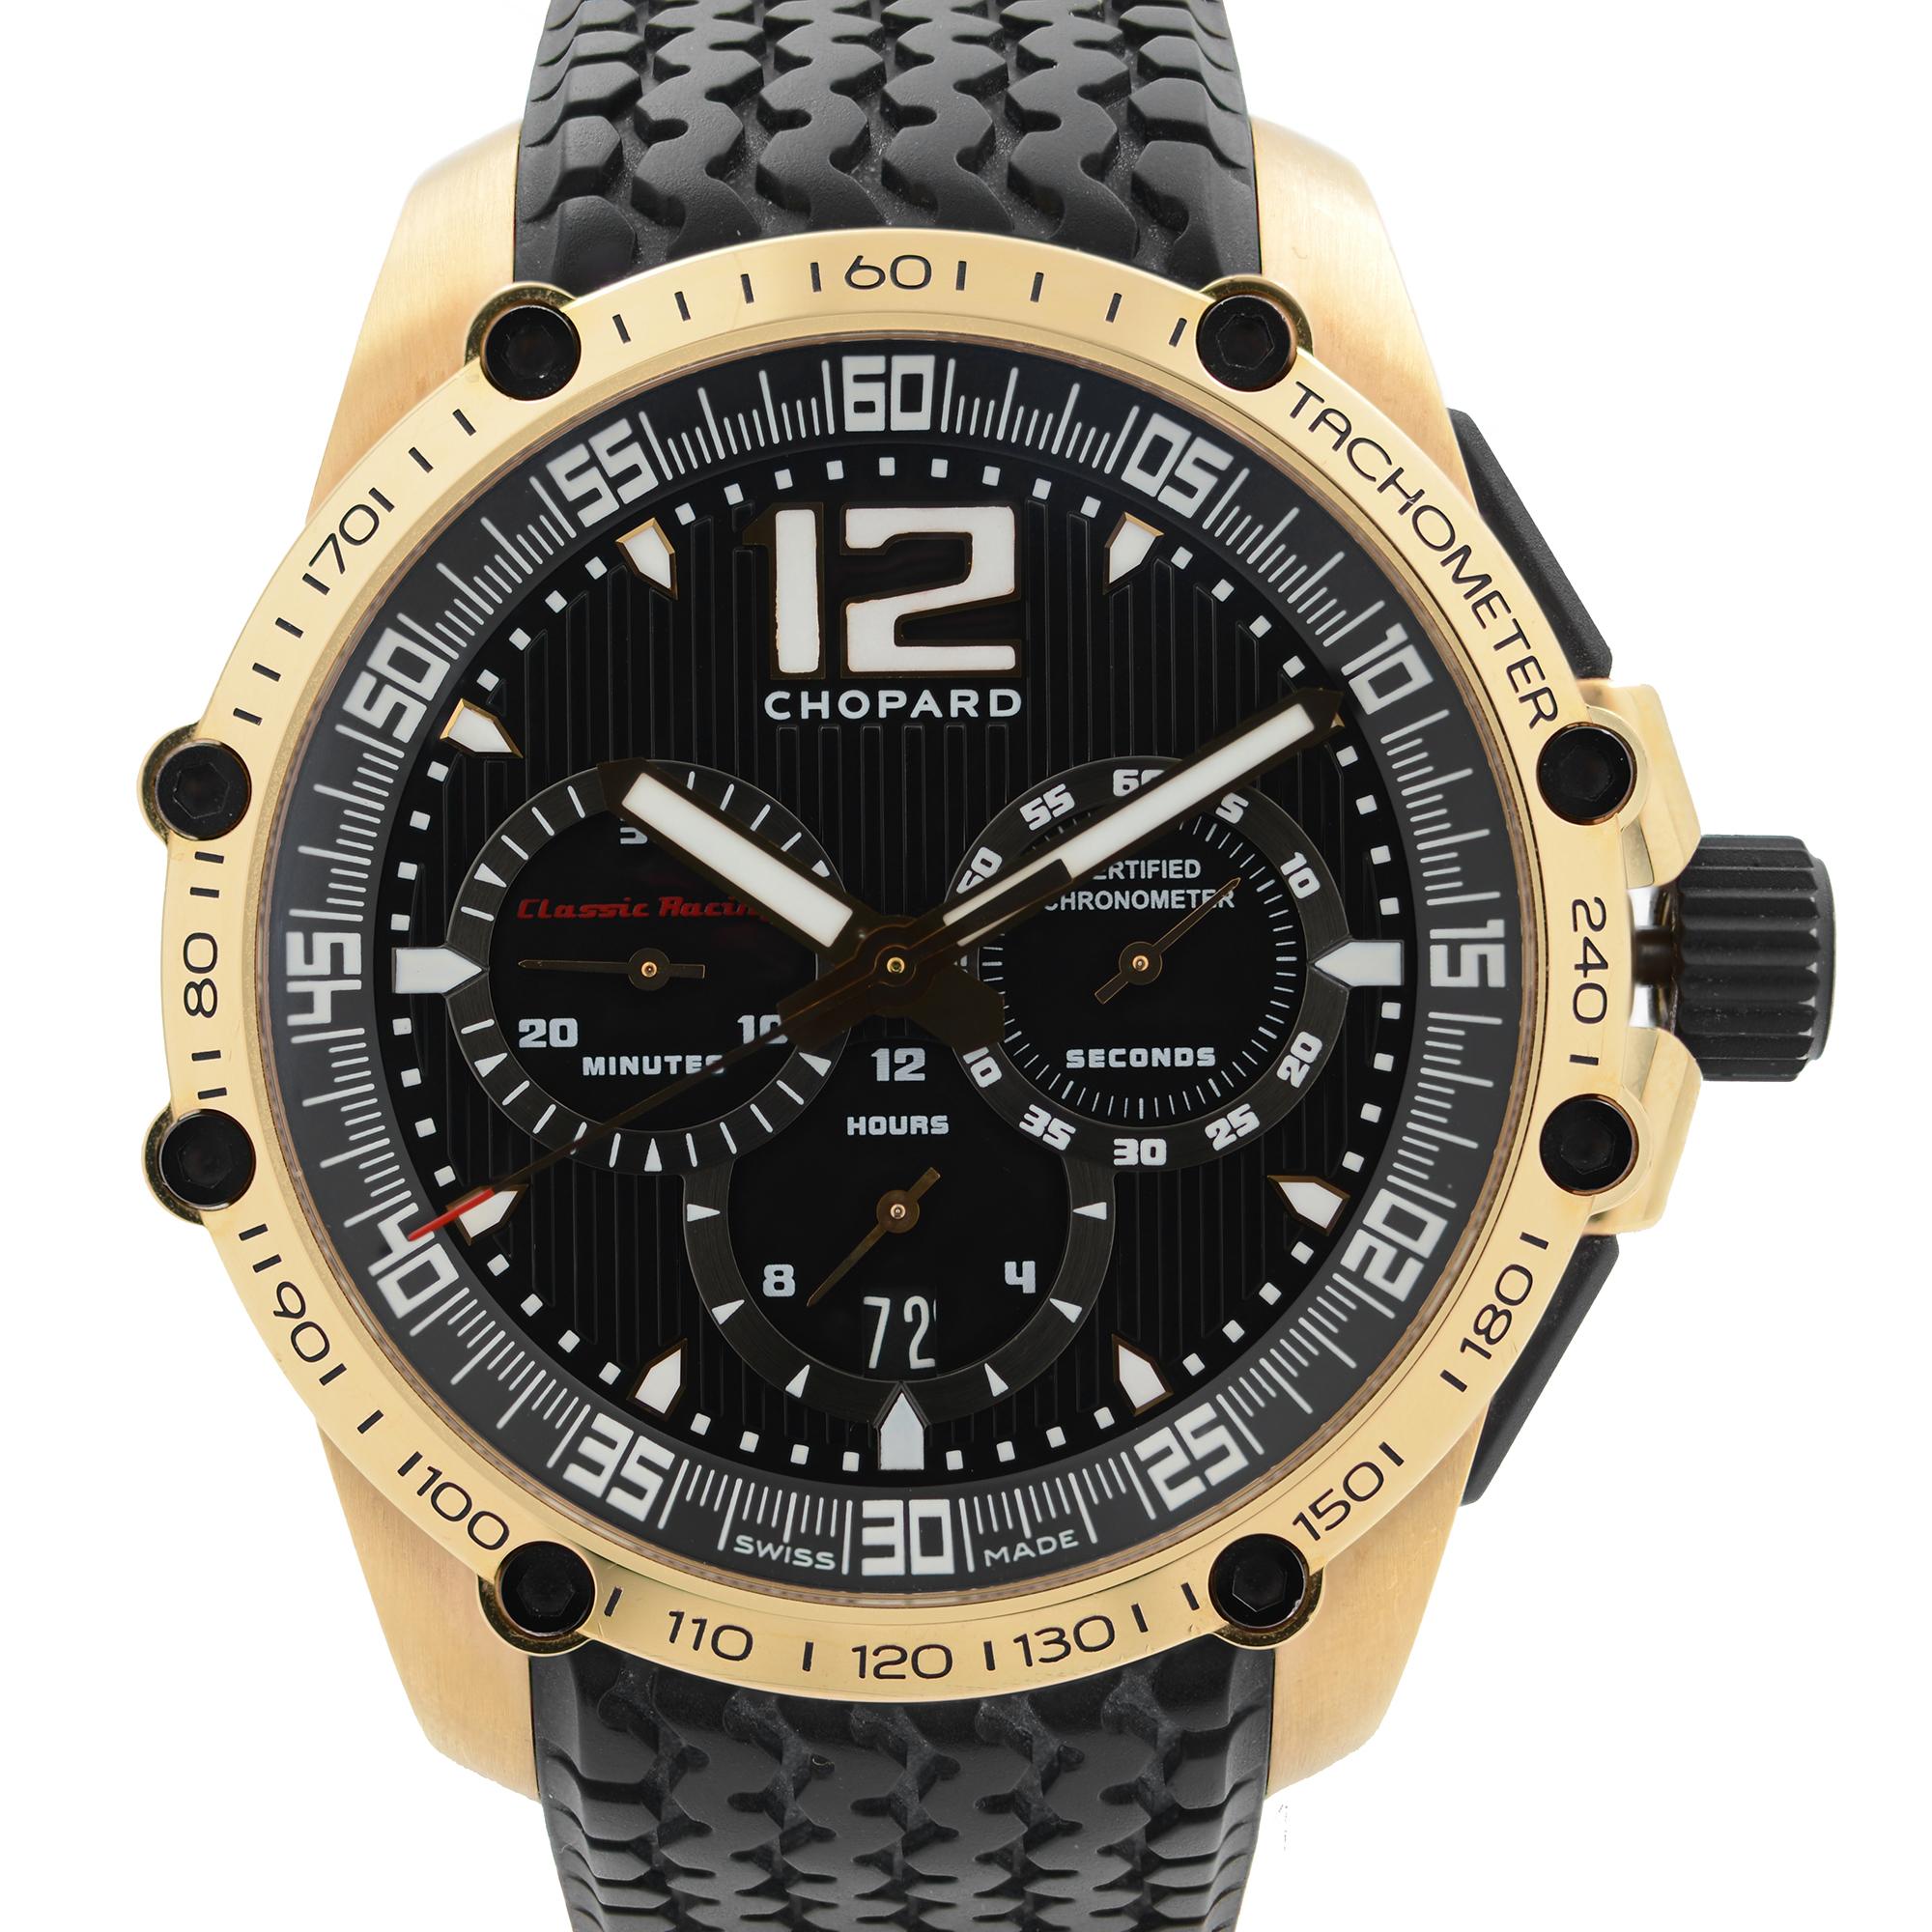 Pre Owned Chopard Classic Racing Limited Edition 18K Rose Gold Black Dial Men's Watch 1276. This Beautiful Timepiece is Powered by Mechanical (Automatic) Movement And Features: Round 18k Rose Gold Case with a Black Rubber Strap, Fixed 18k Rose Gold